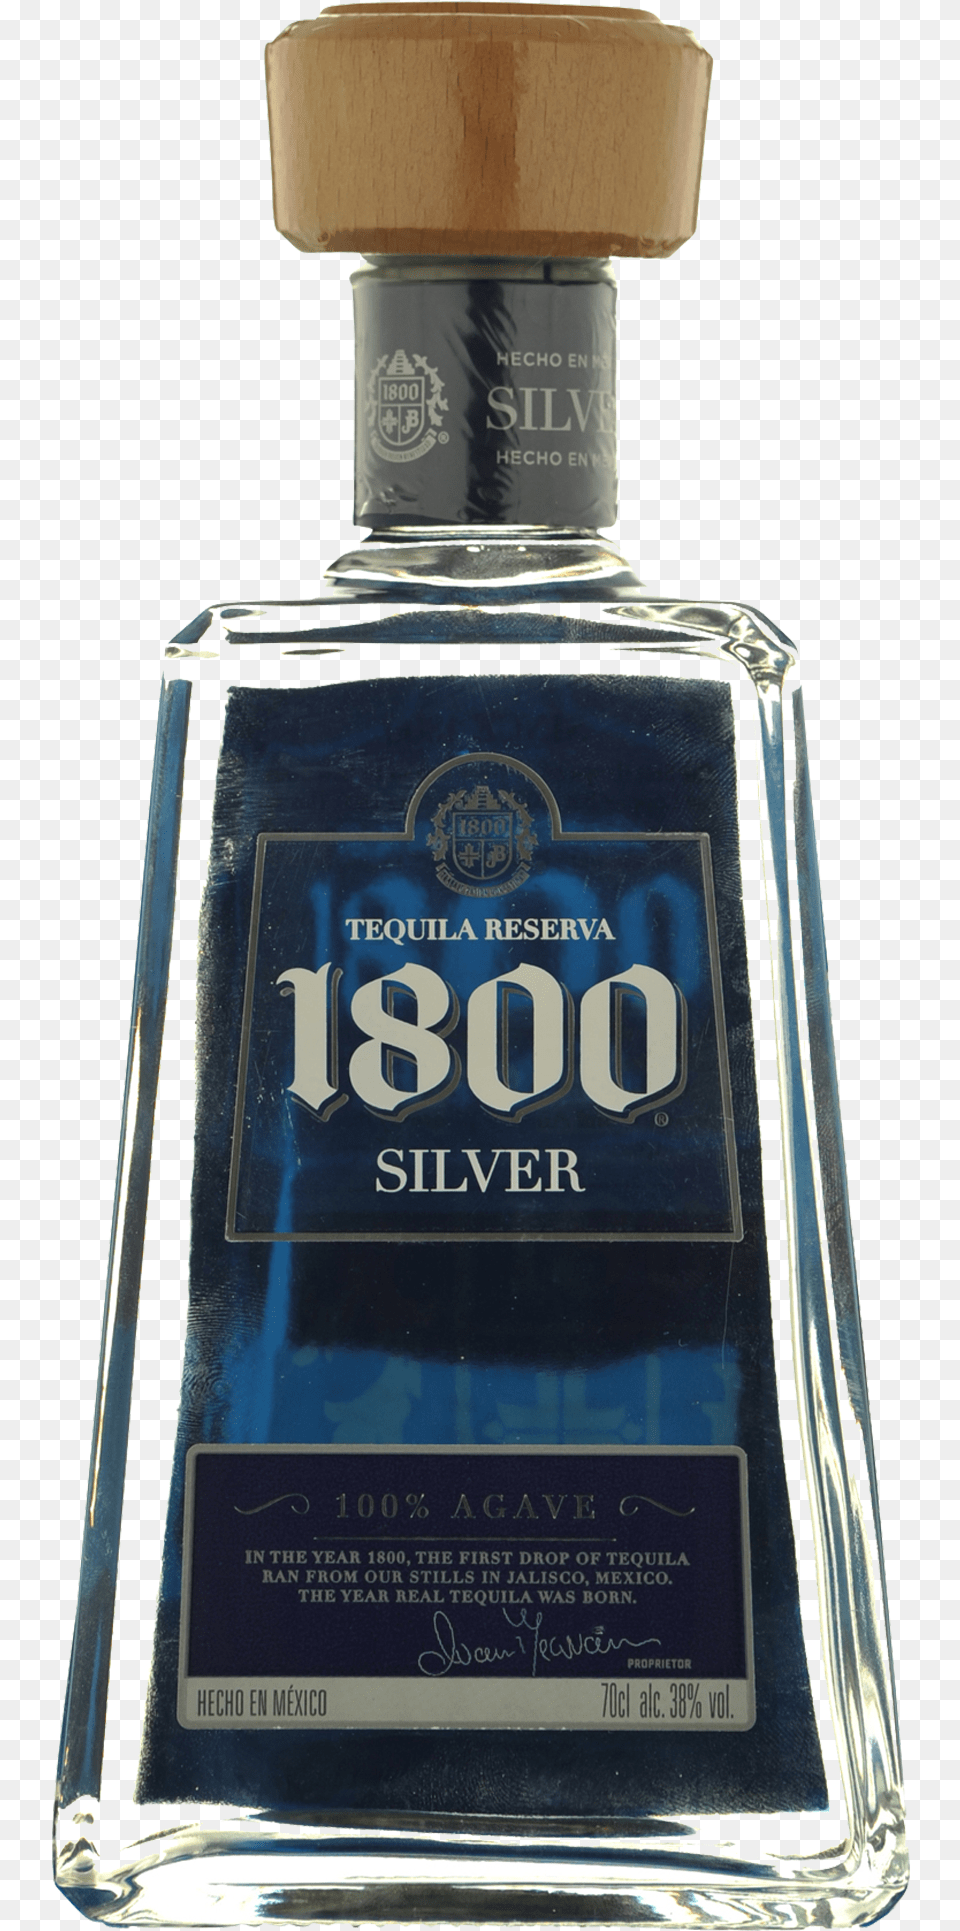 Silver Tequila 700ml 1800 Silver Tequila, Alcohol, Beverage, Liquor, Bottle Png Image